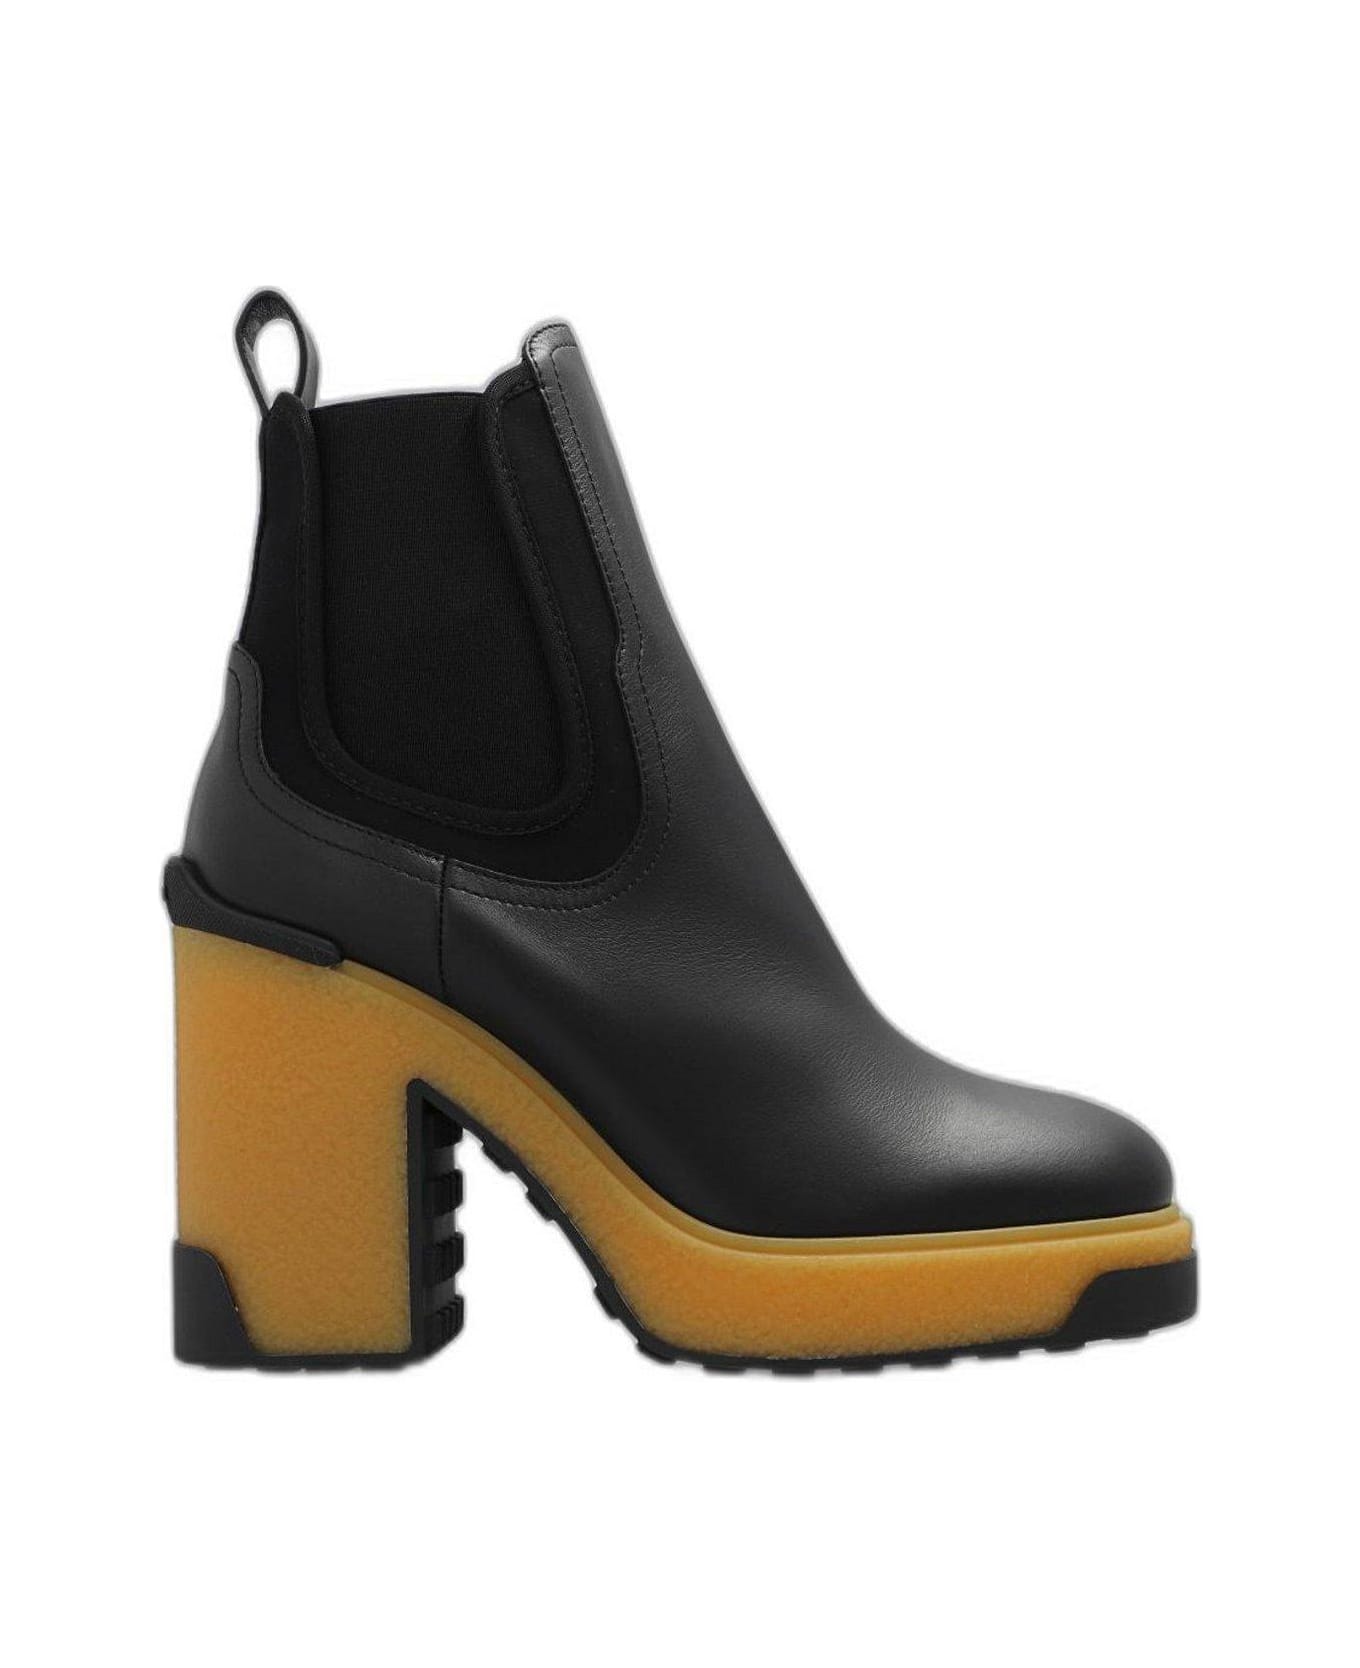 Moncler Isla Heeled Ankle Boots - Black